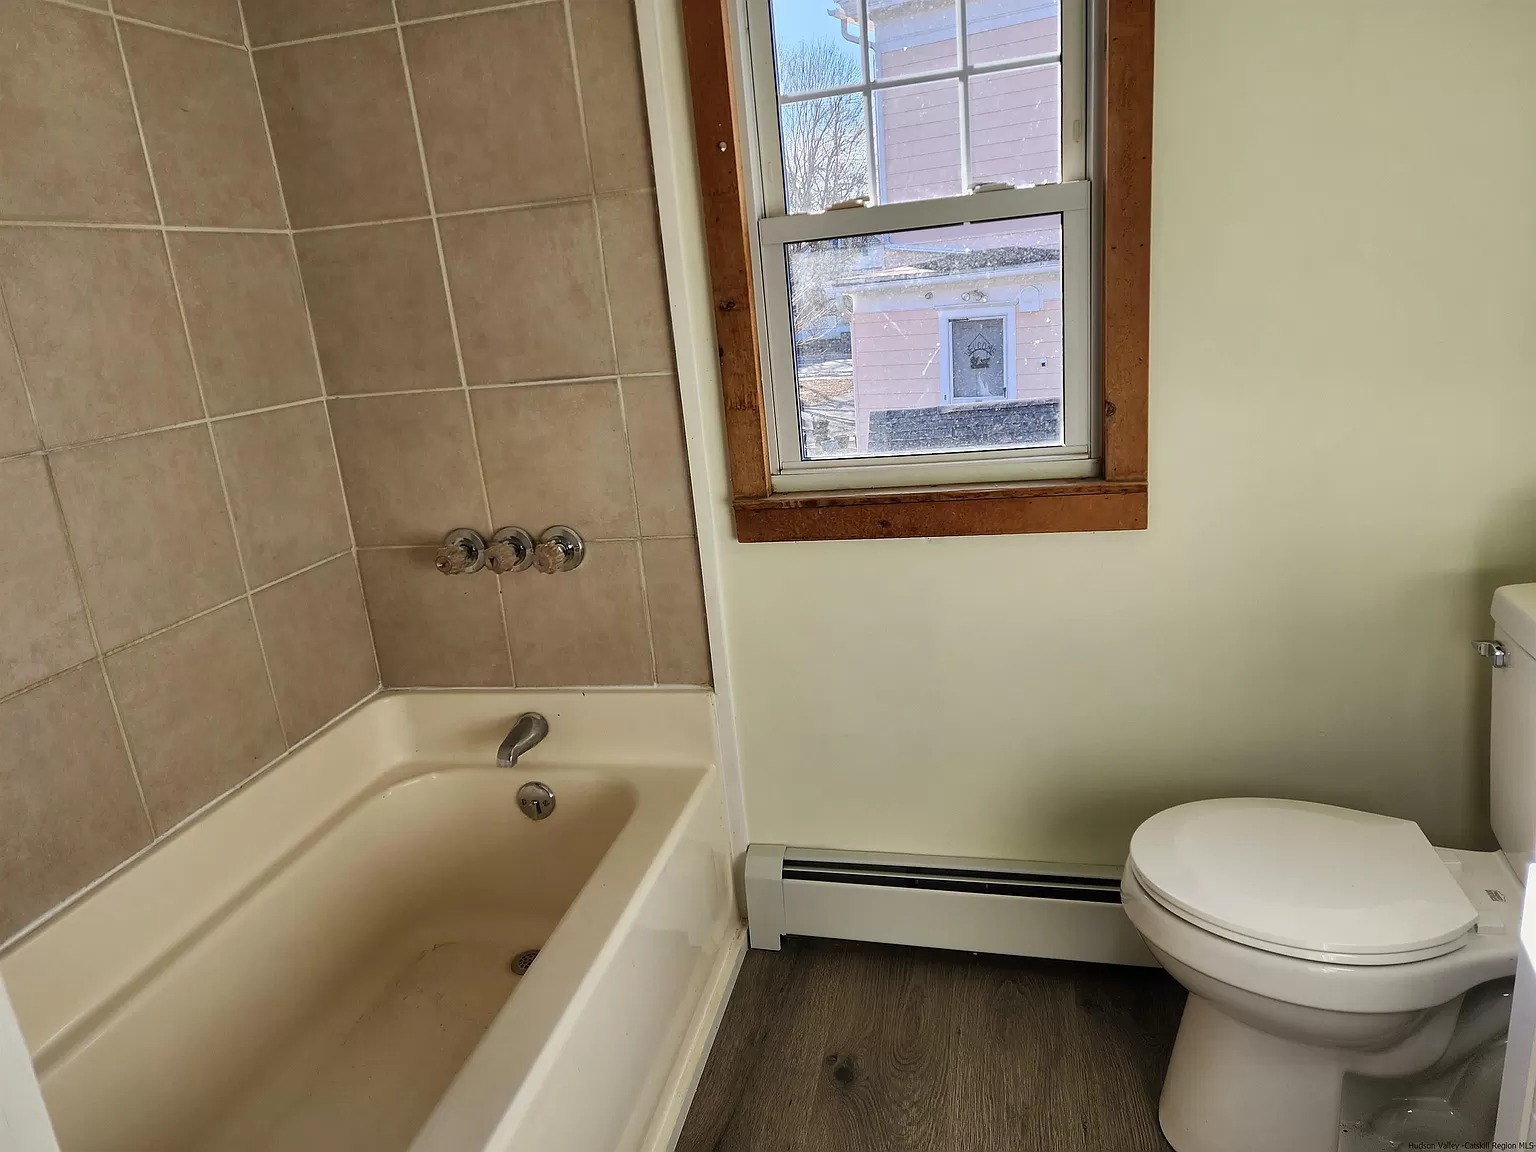 Built-in bathtub with toilet and wood-trimmed window